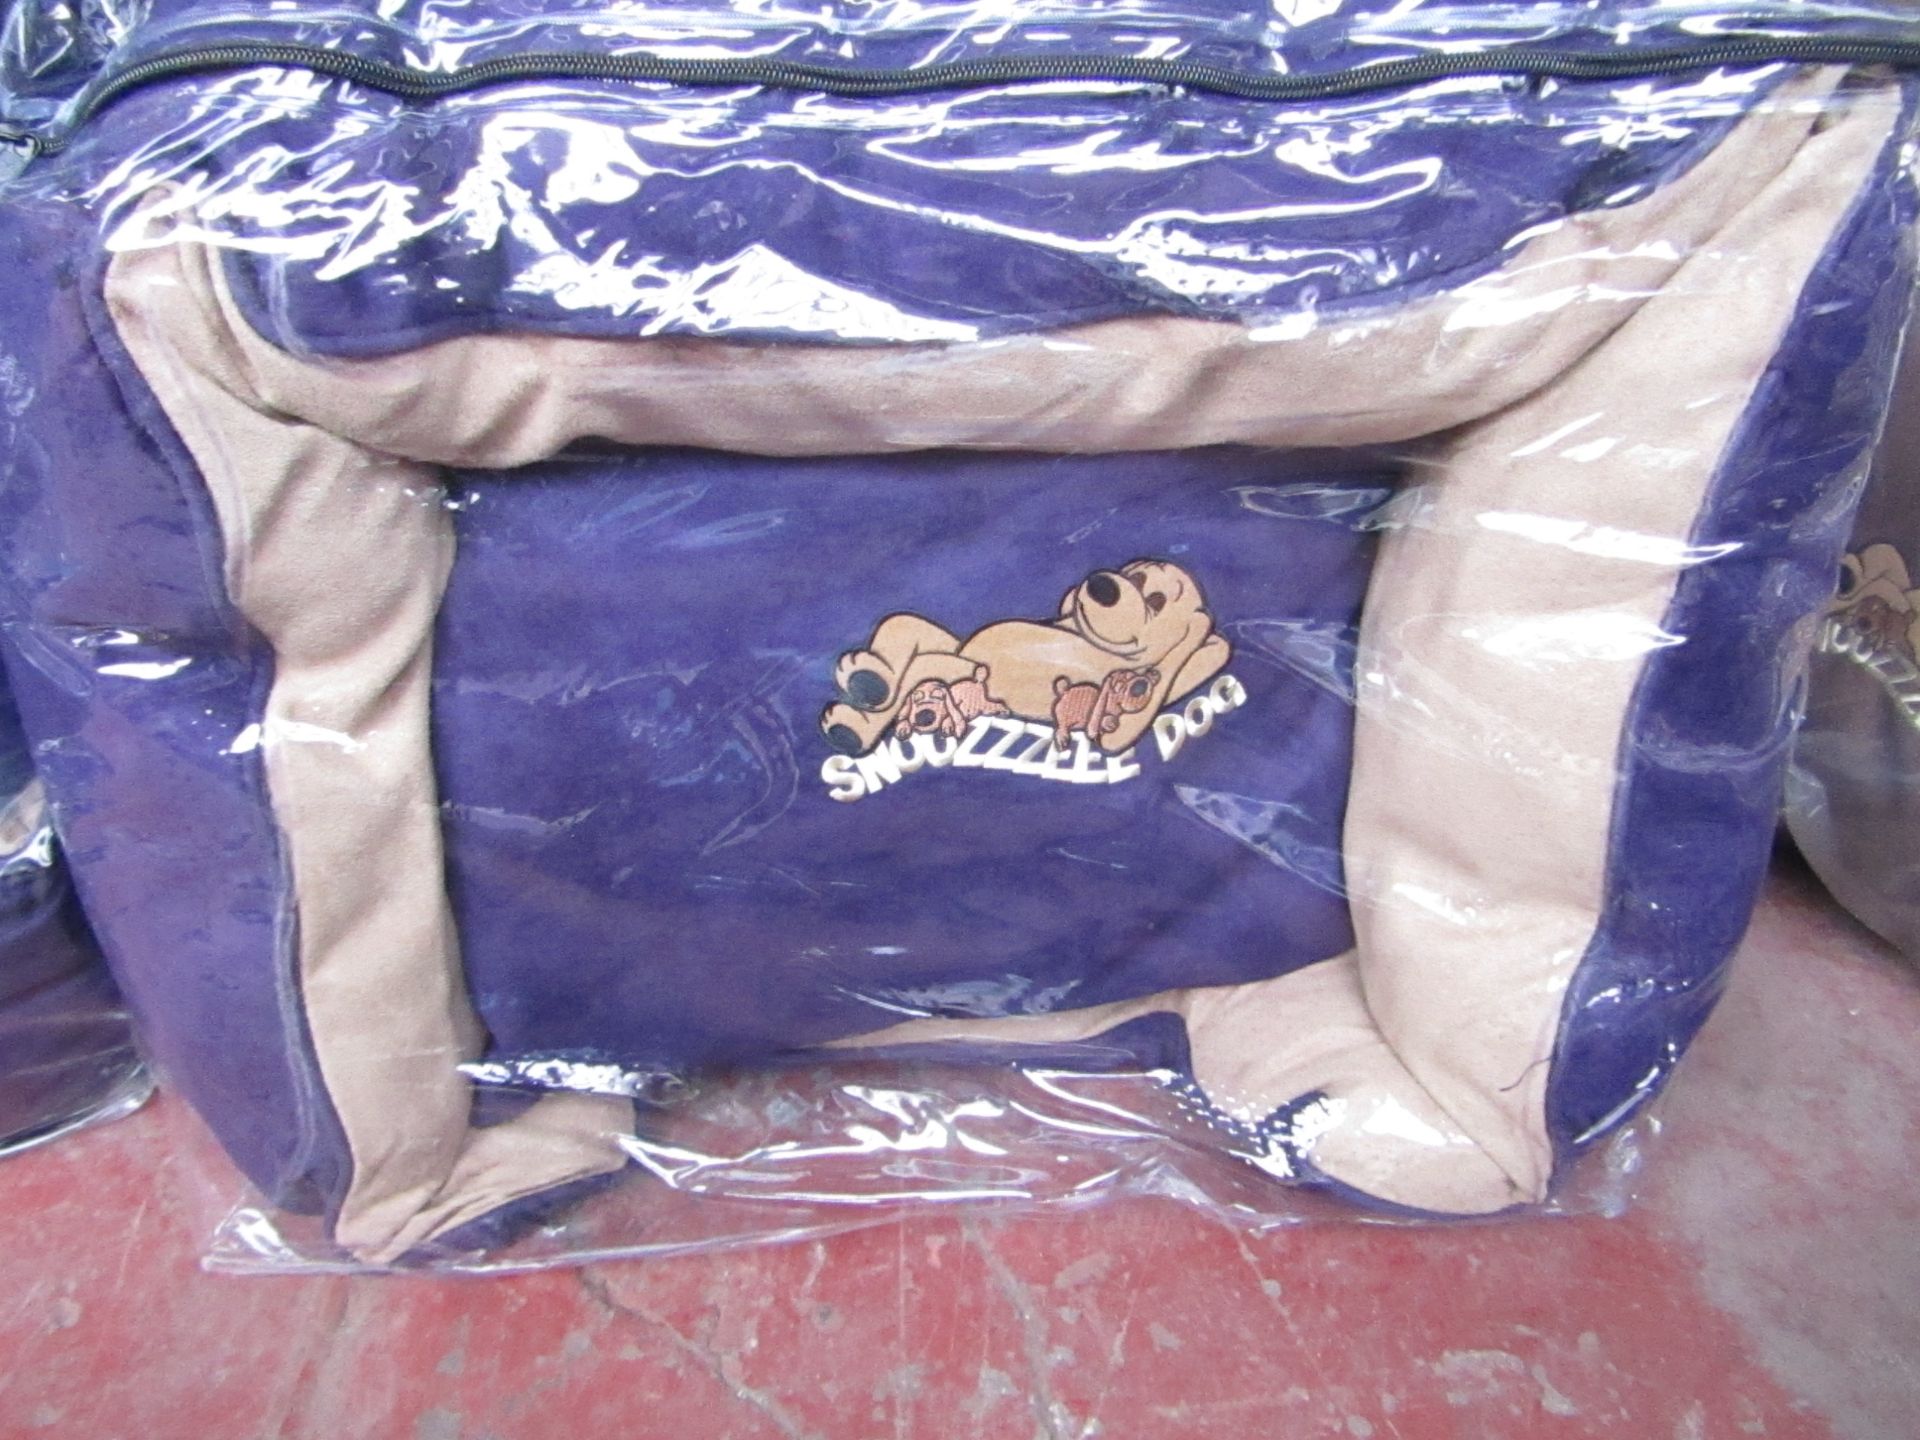 5x Snoozzzeee Dog - Purple Sofa Dog Bed (23") - All New & Packaged.